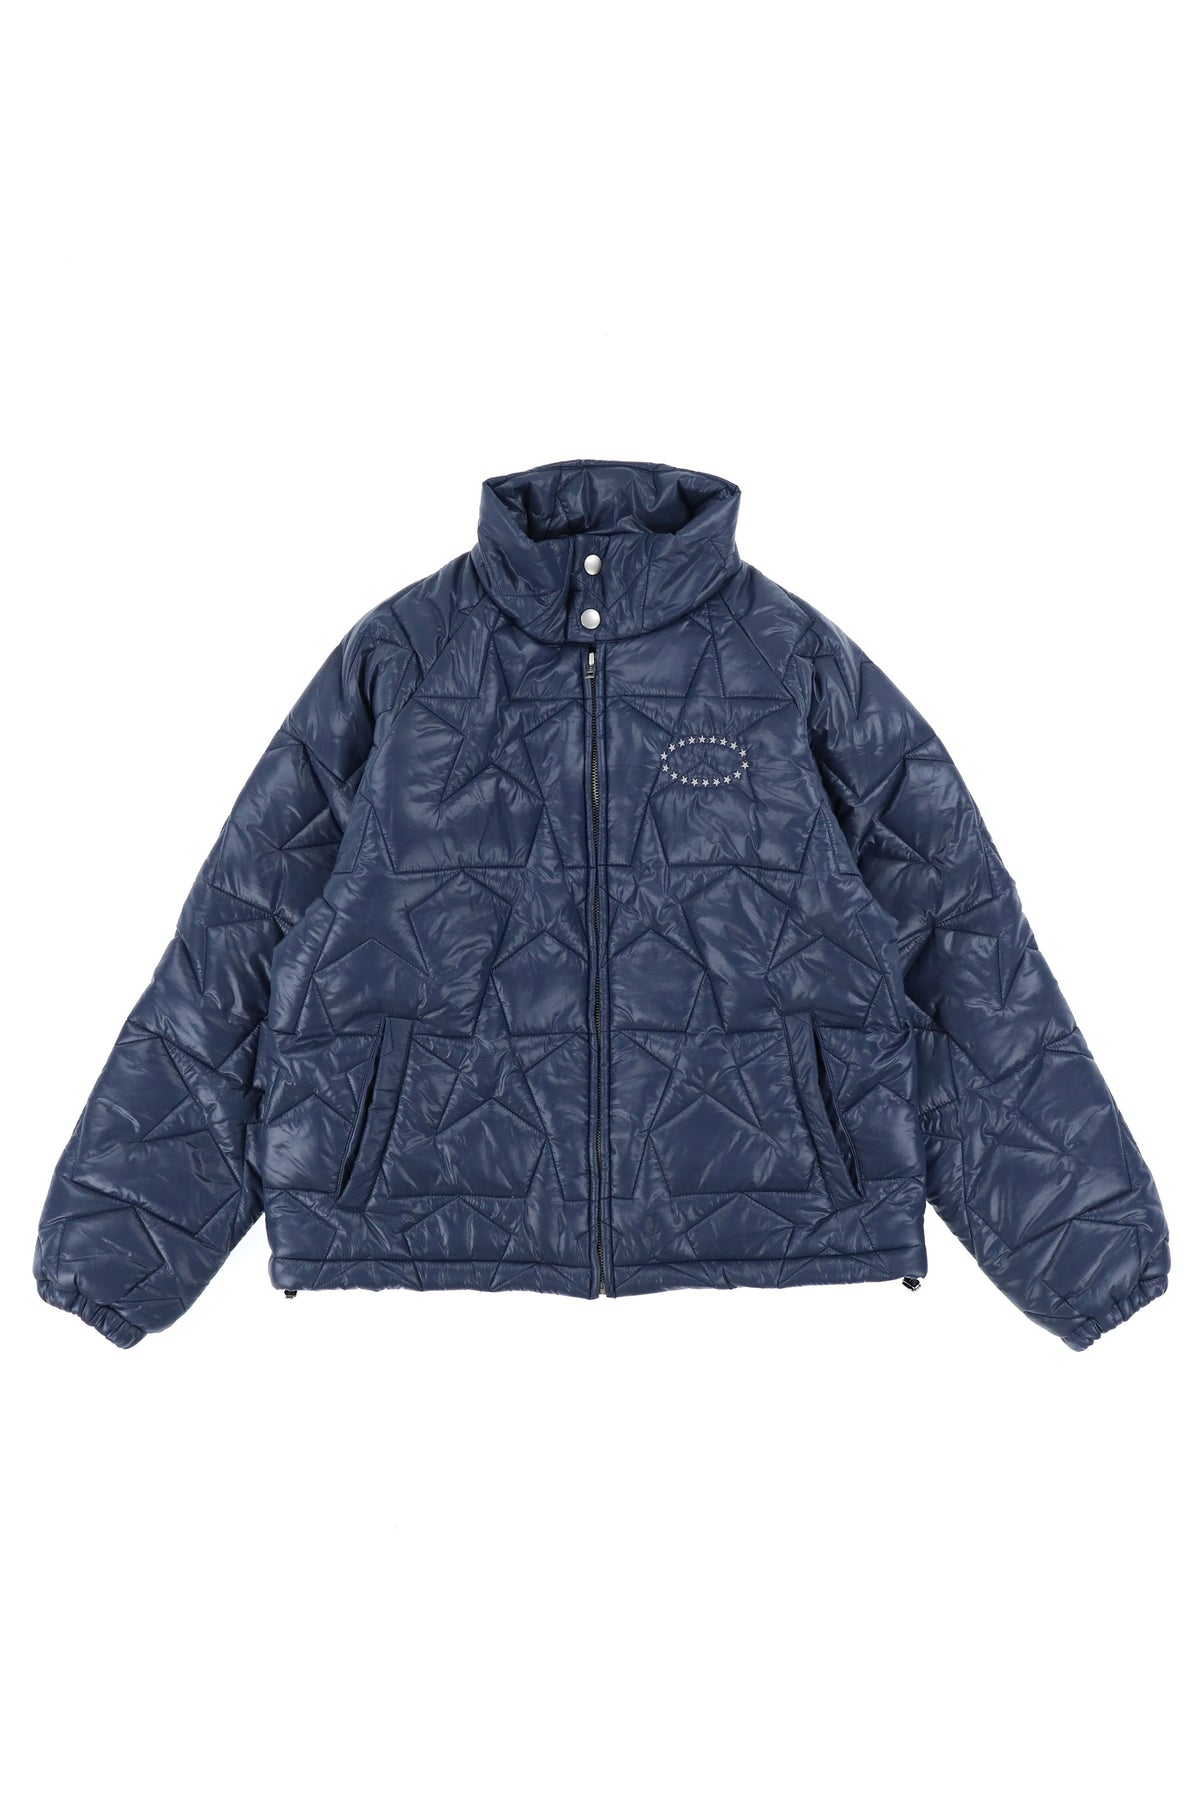 AFB NYLON STAR QUILTING JACKET / NVY